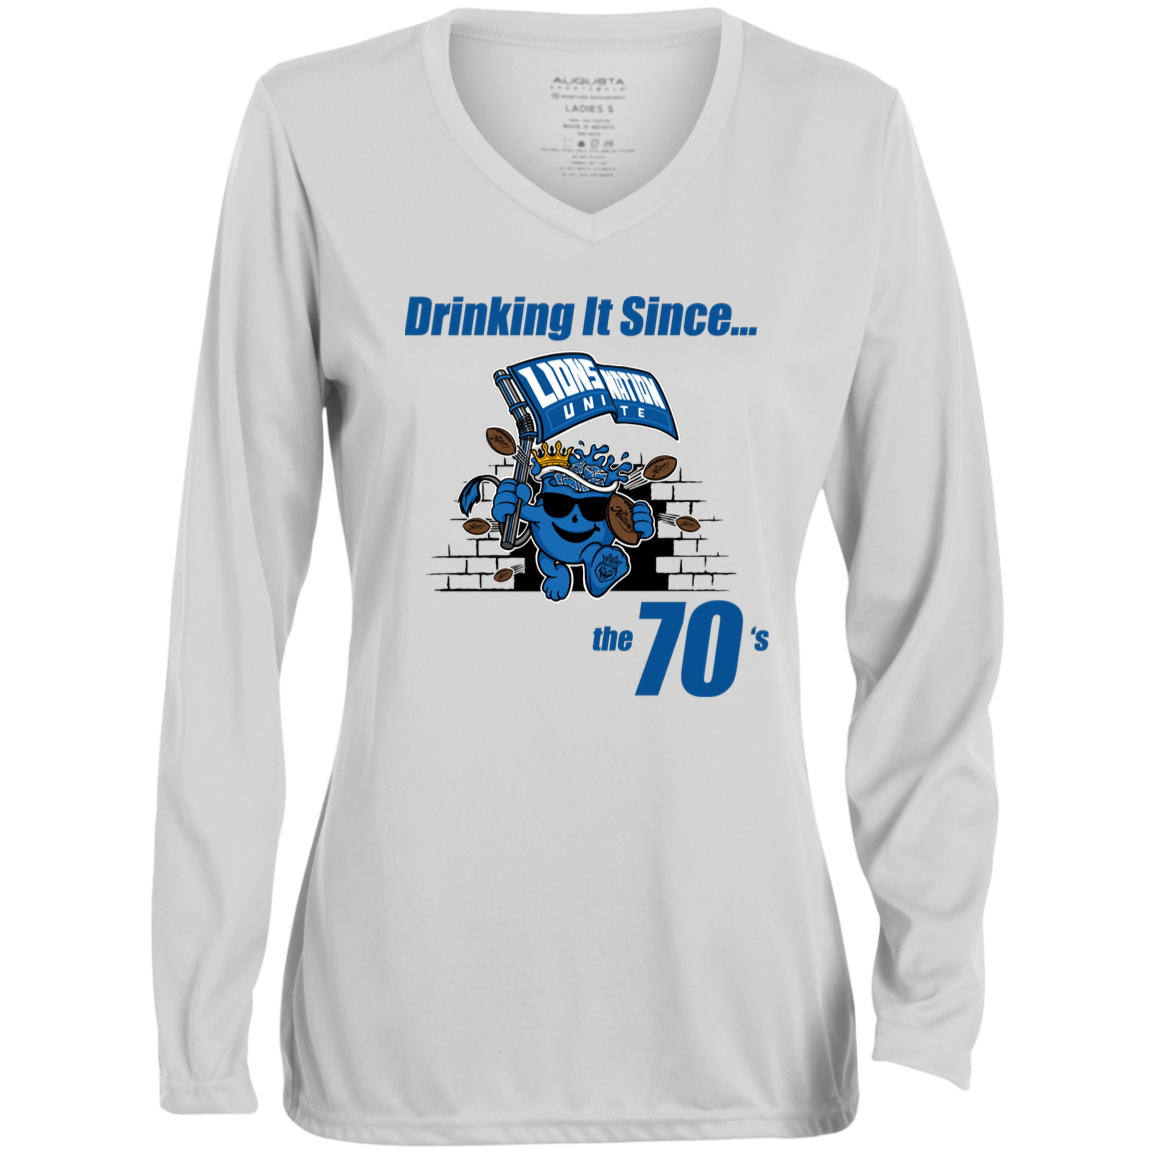 Drinking It Since the 70's Women's Long-Sleeved T-Shirt